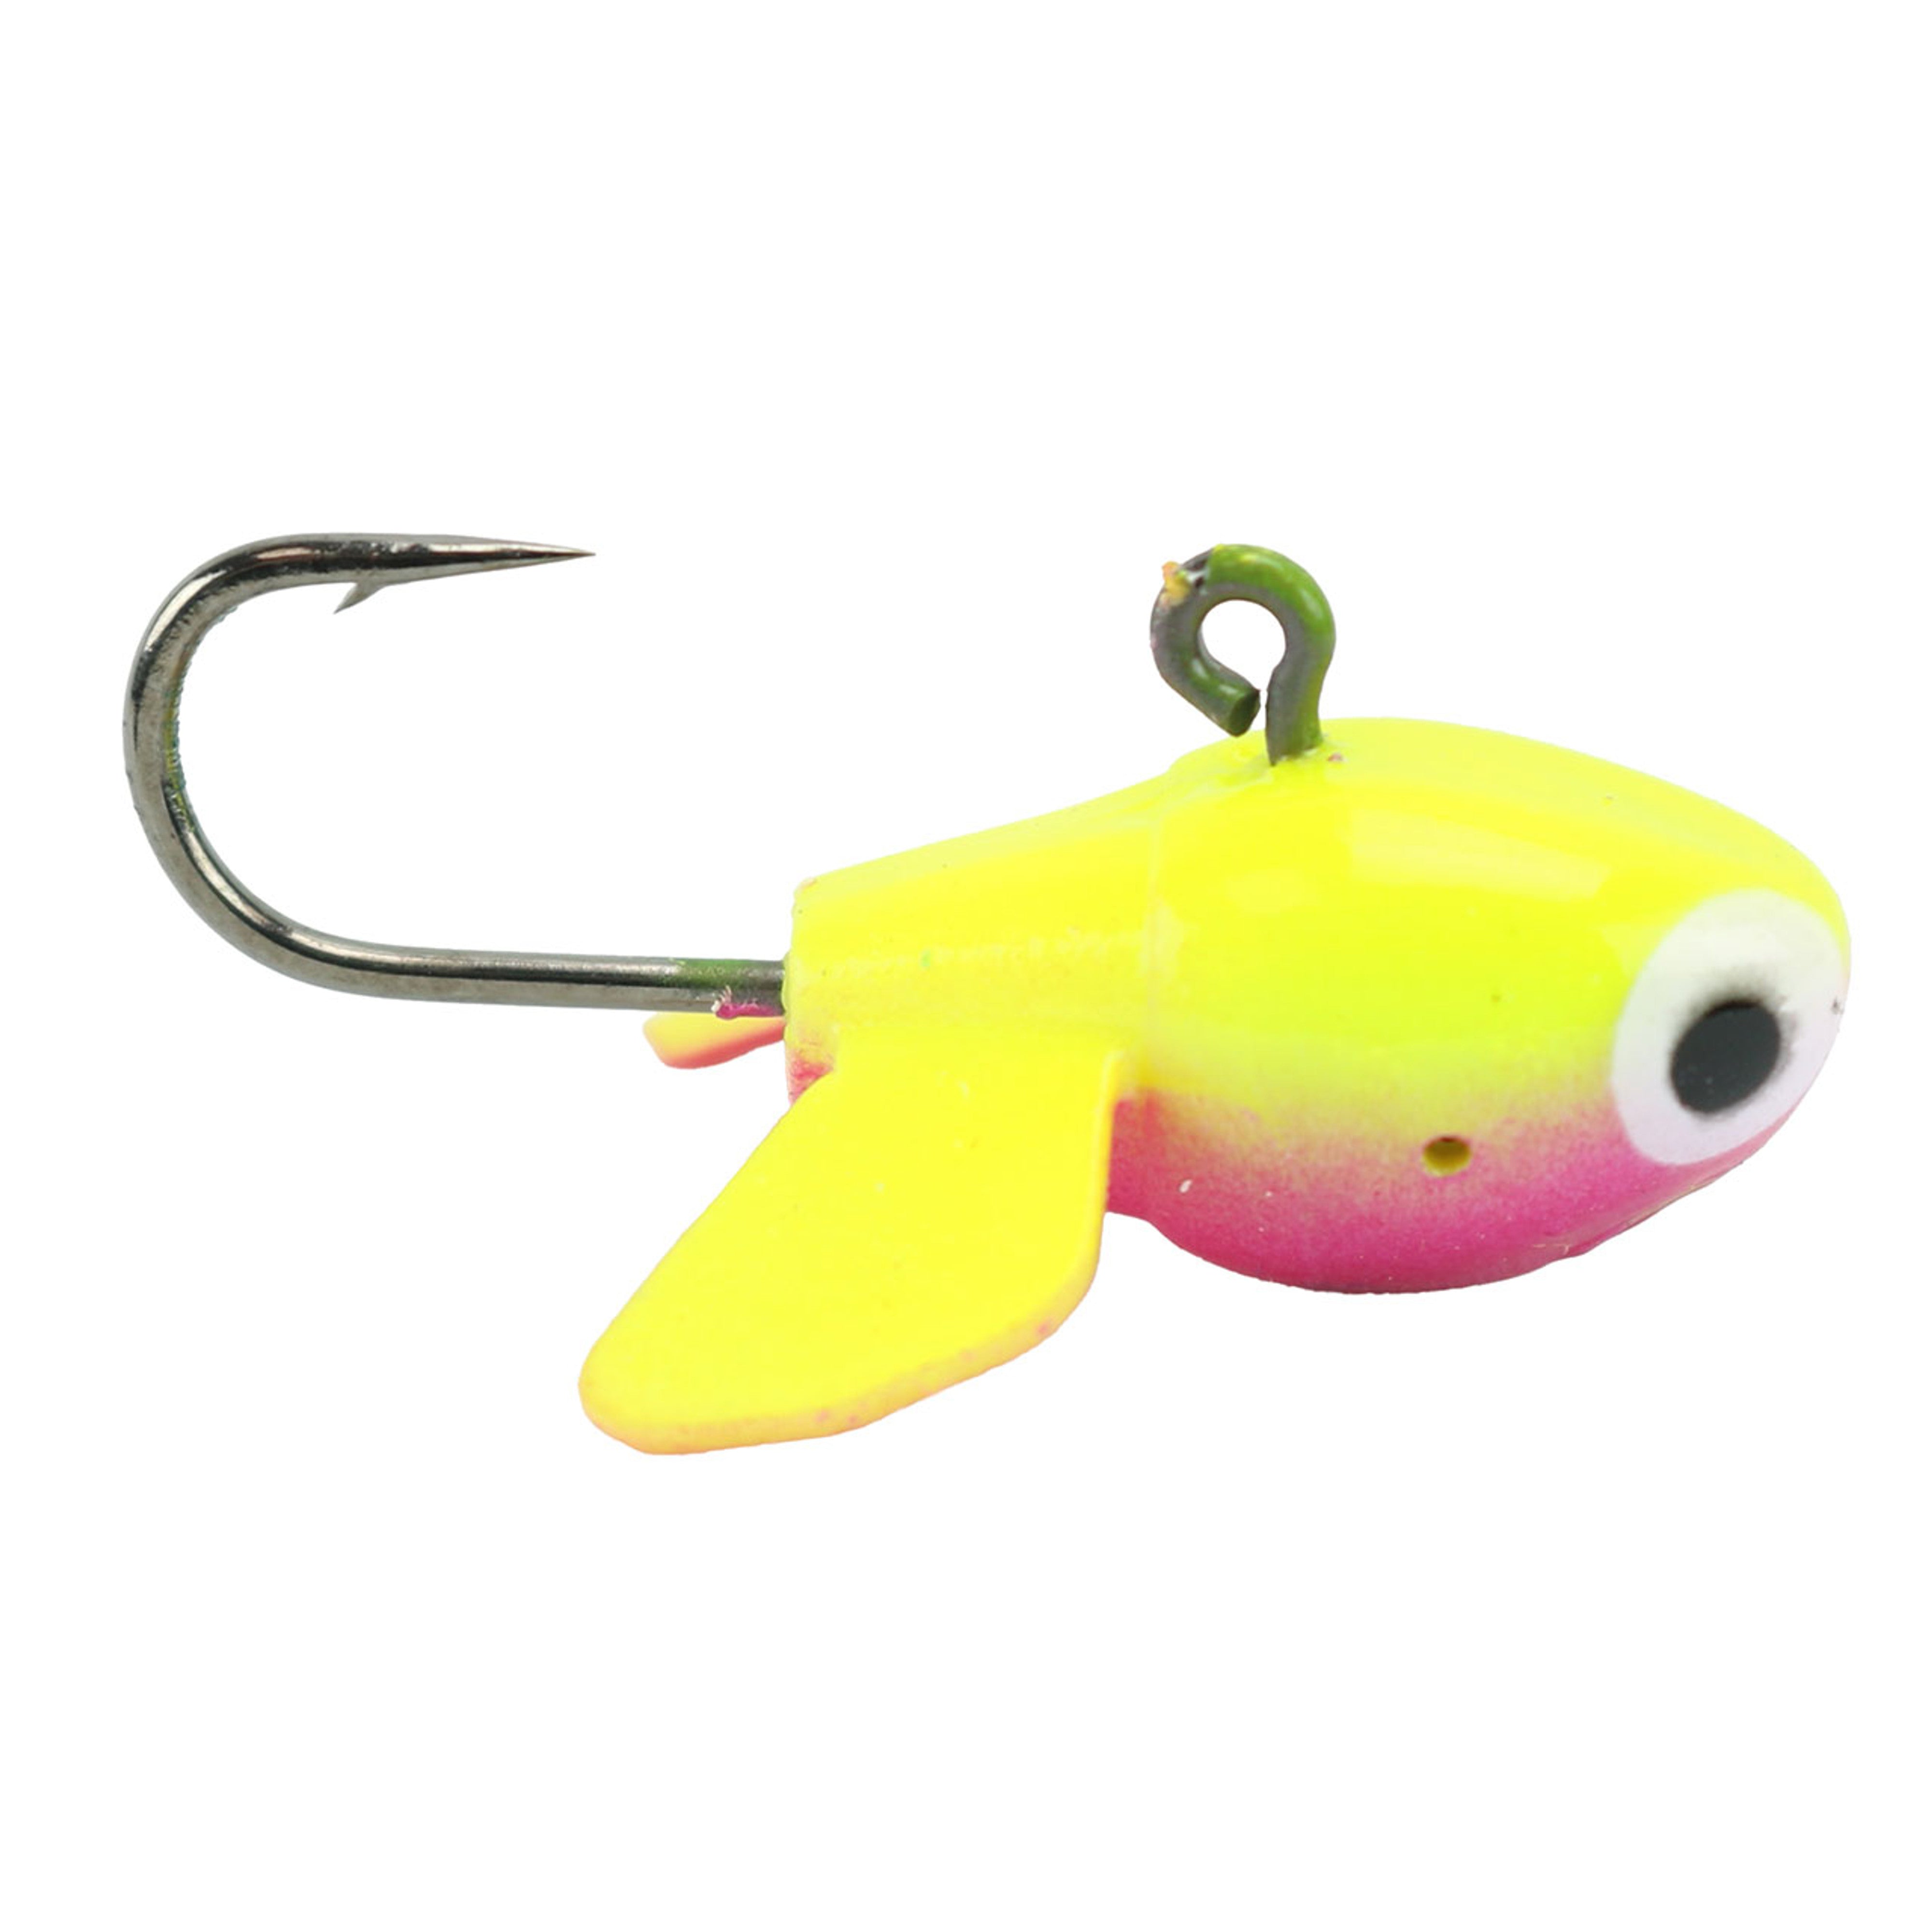 Acme Tackle - Acme Hyper-T Tungsten Jig - Acme Tackle Company